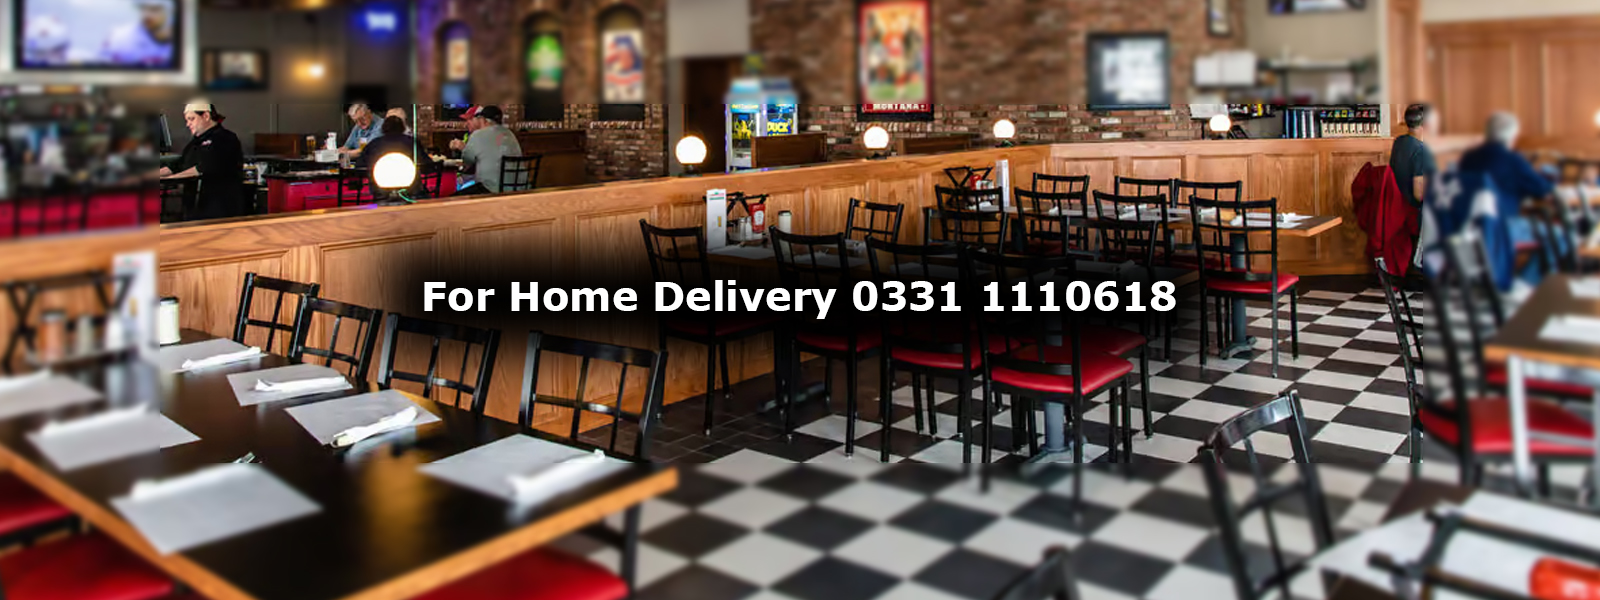 pizza-m21-gulberg-lahore-to-order-call-0331-1110618